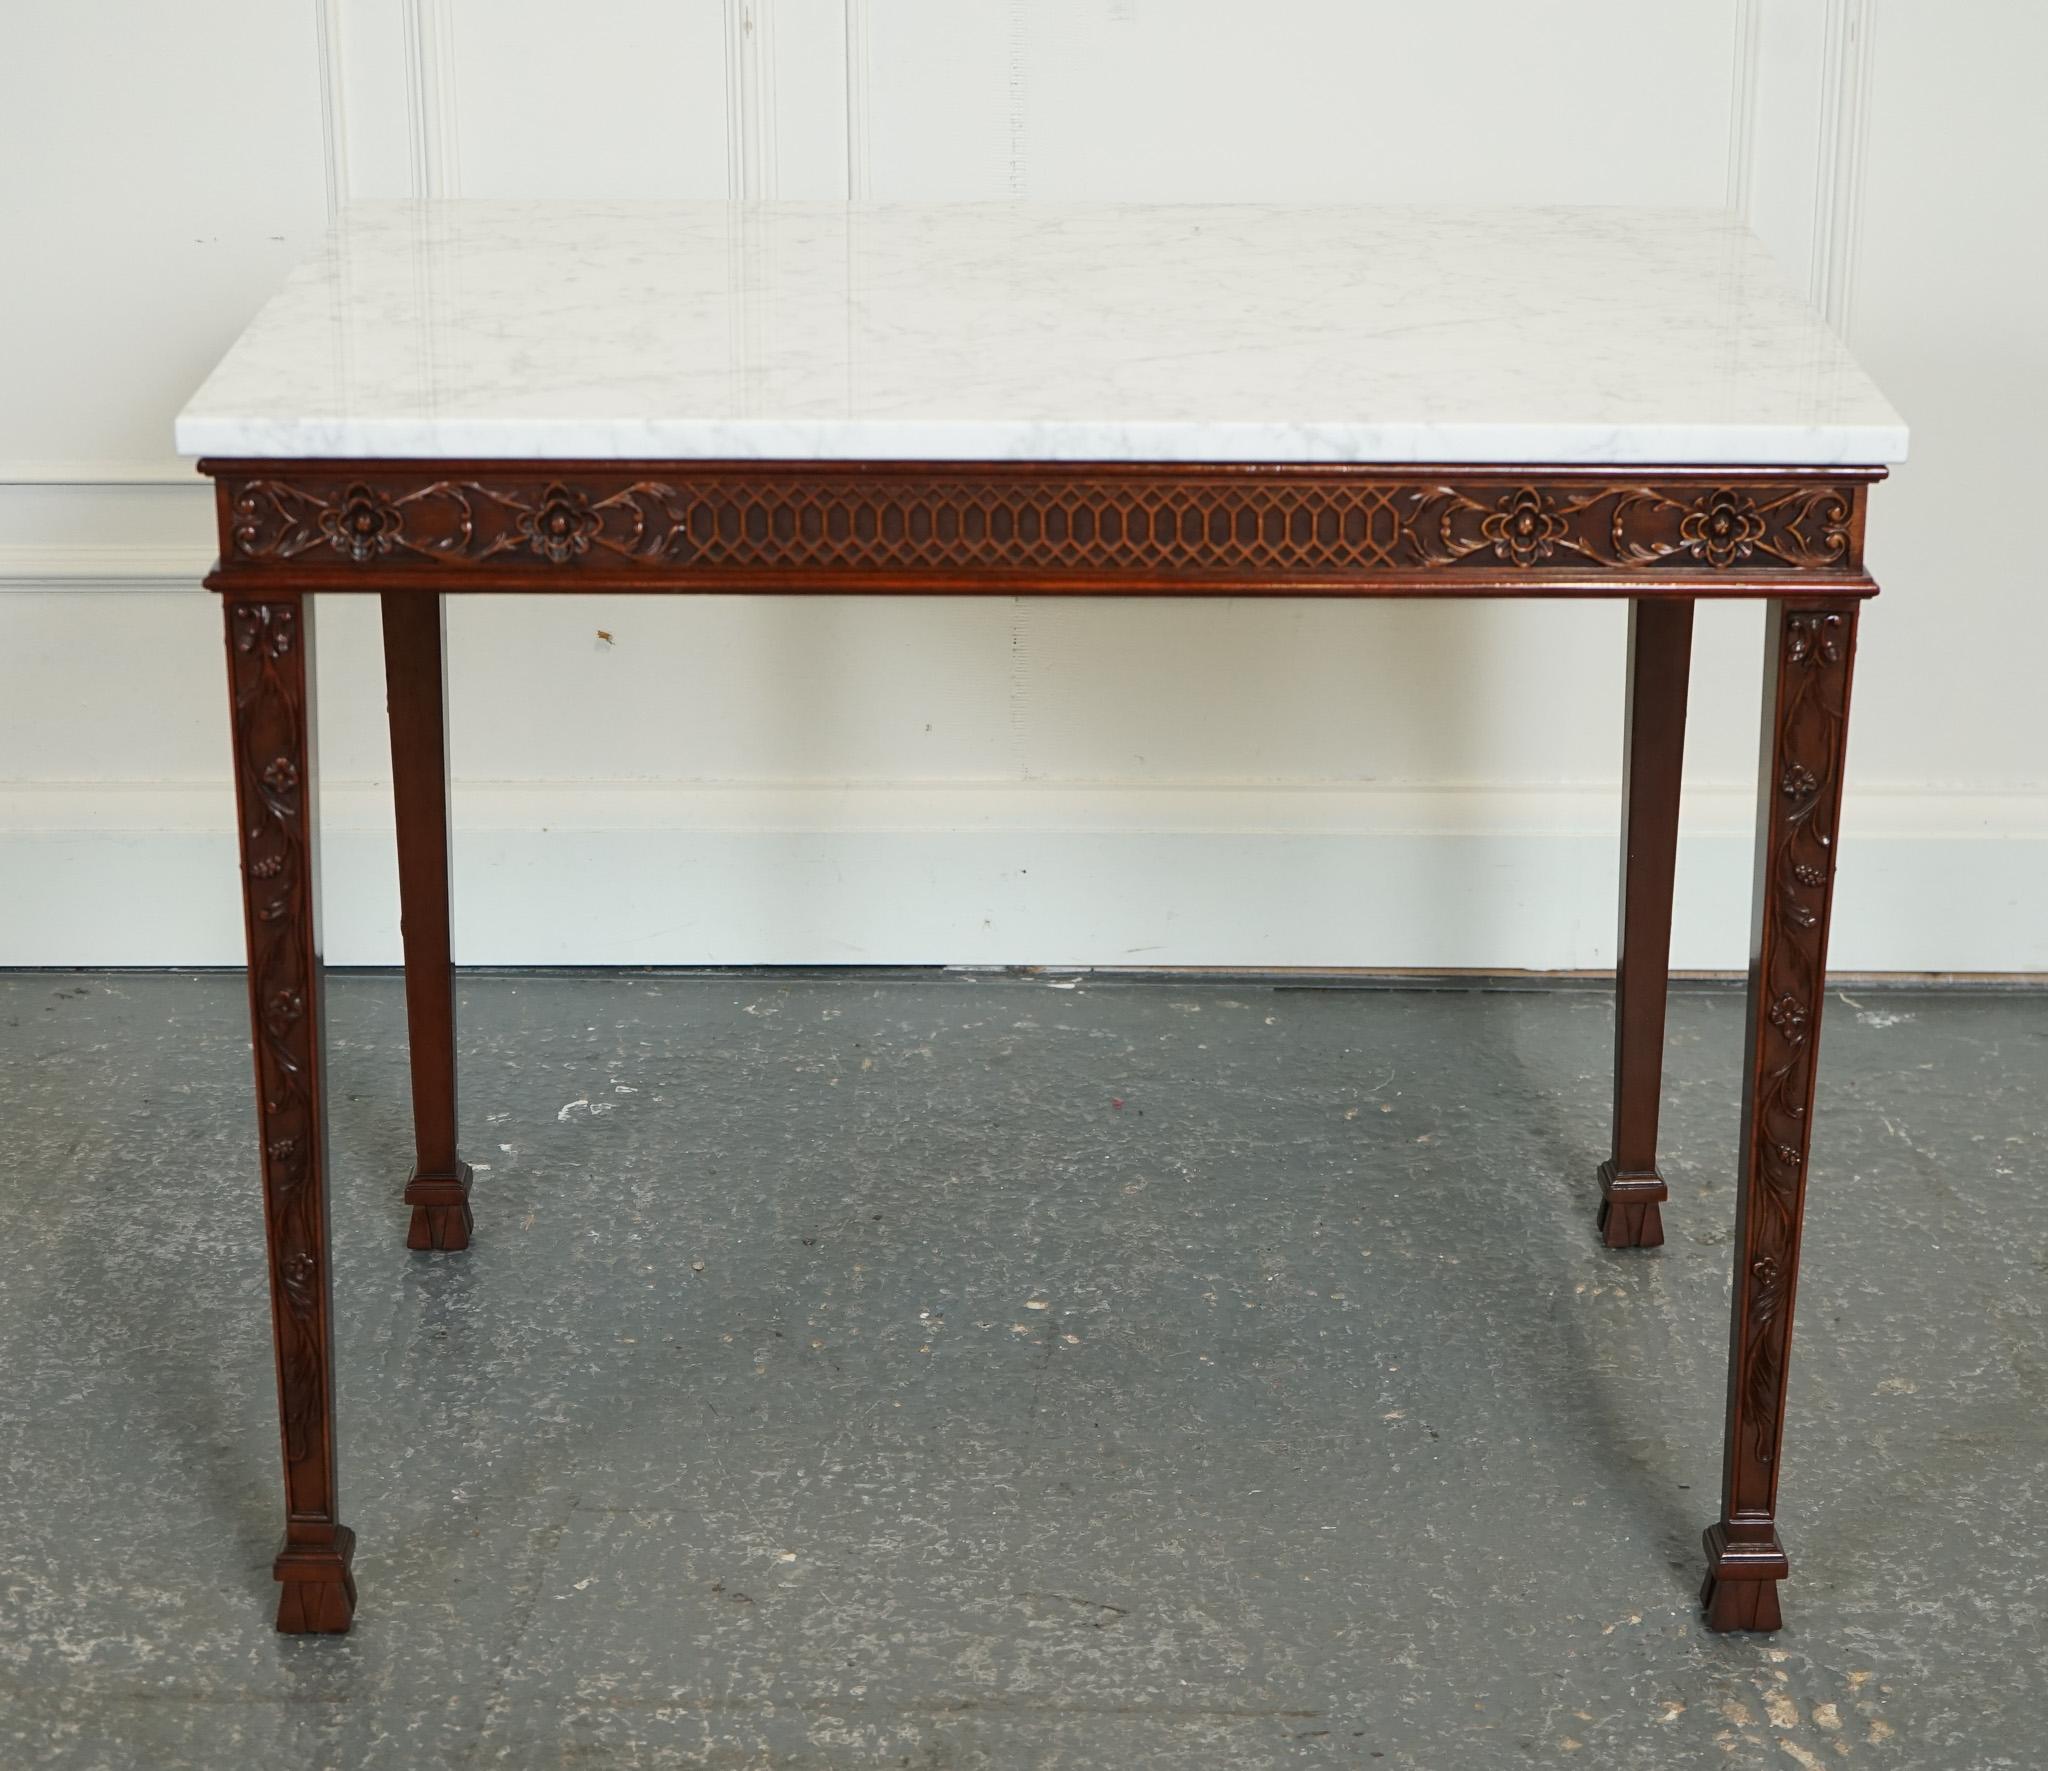 PAiR OF CHIPPENDALE  Style CONSOLE TabLES MIT NEW WHITE CARRARA MARBLE TOPS (Britisch) im Angebot